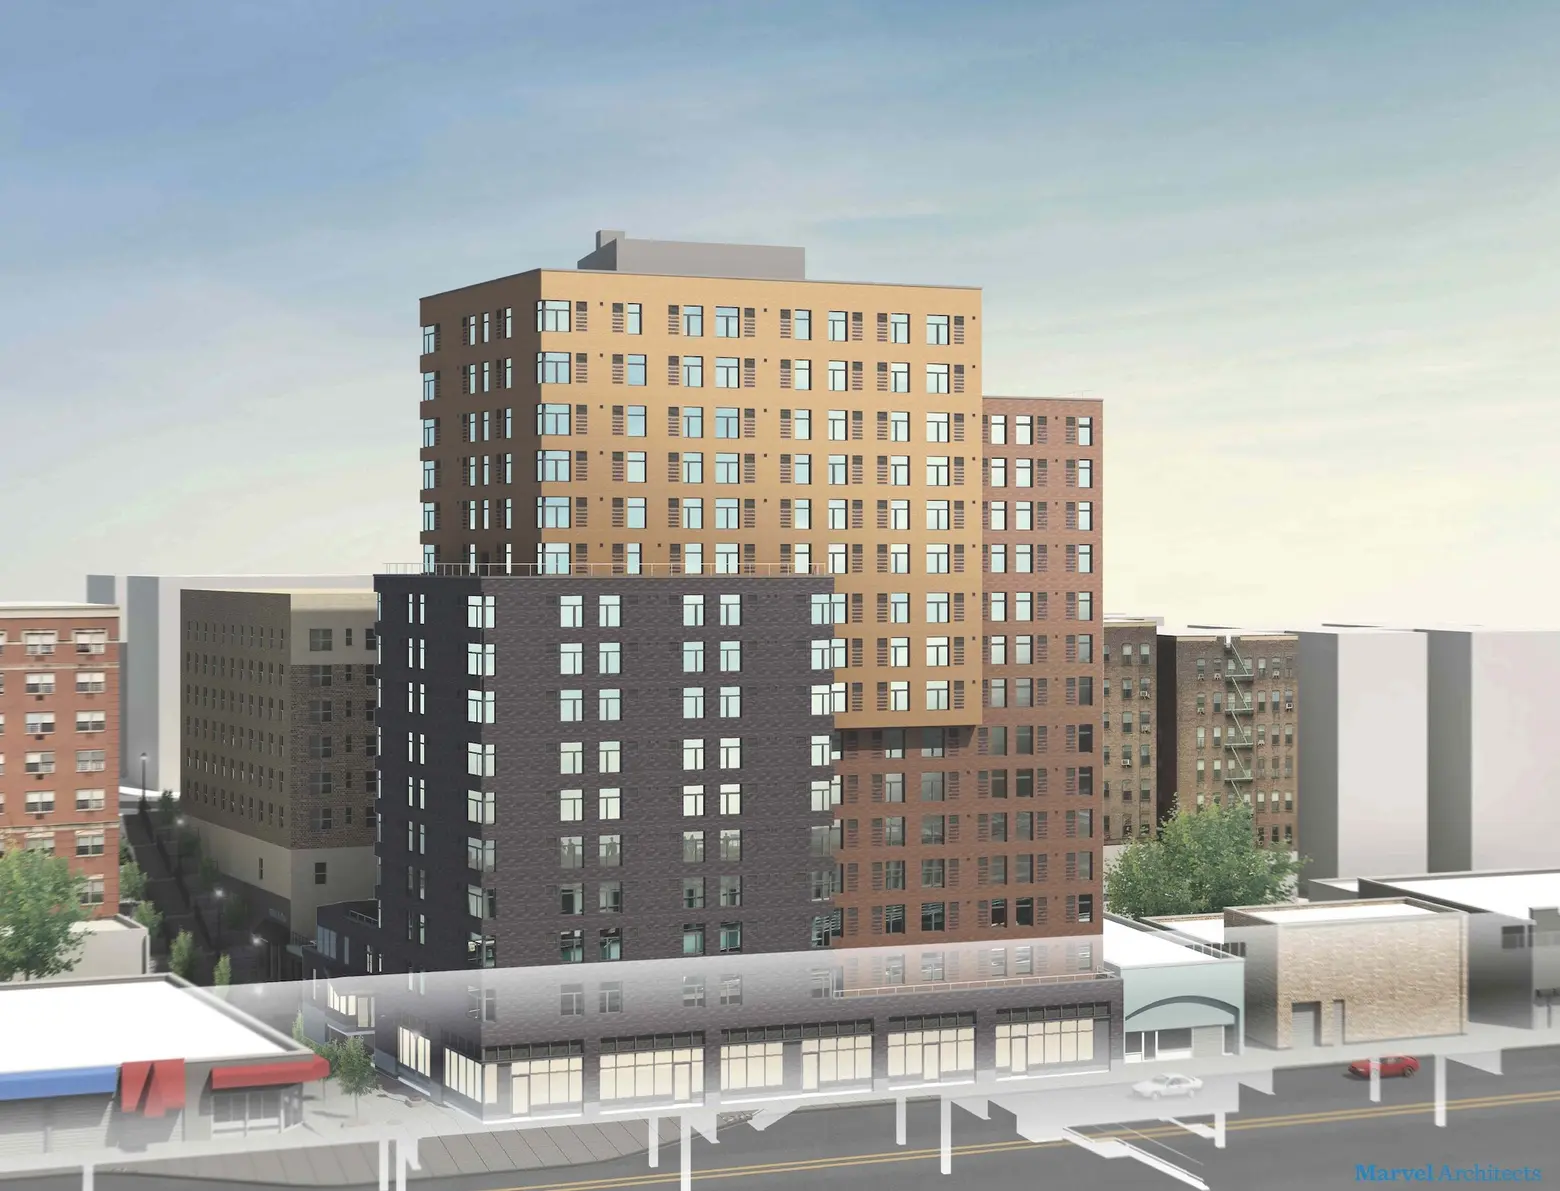 Apply for 60 affordable apartments at new Bronx rental, from $947/month